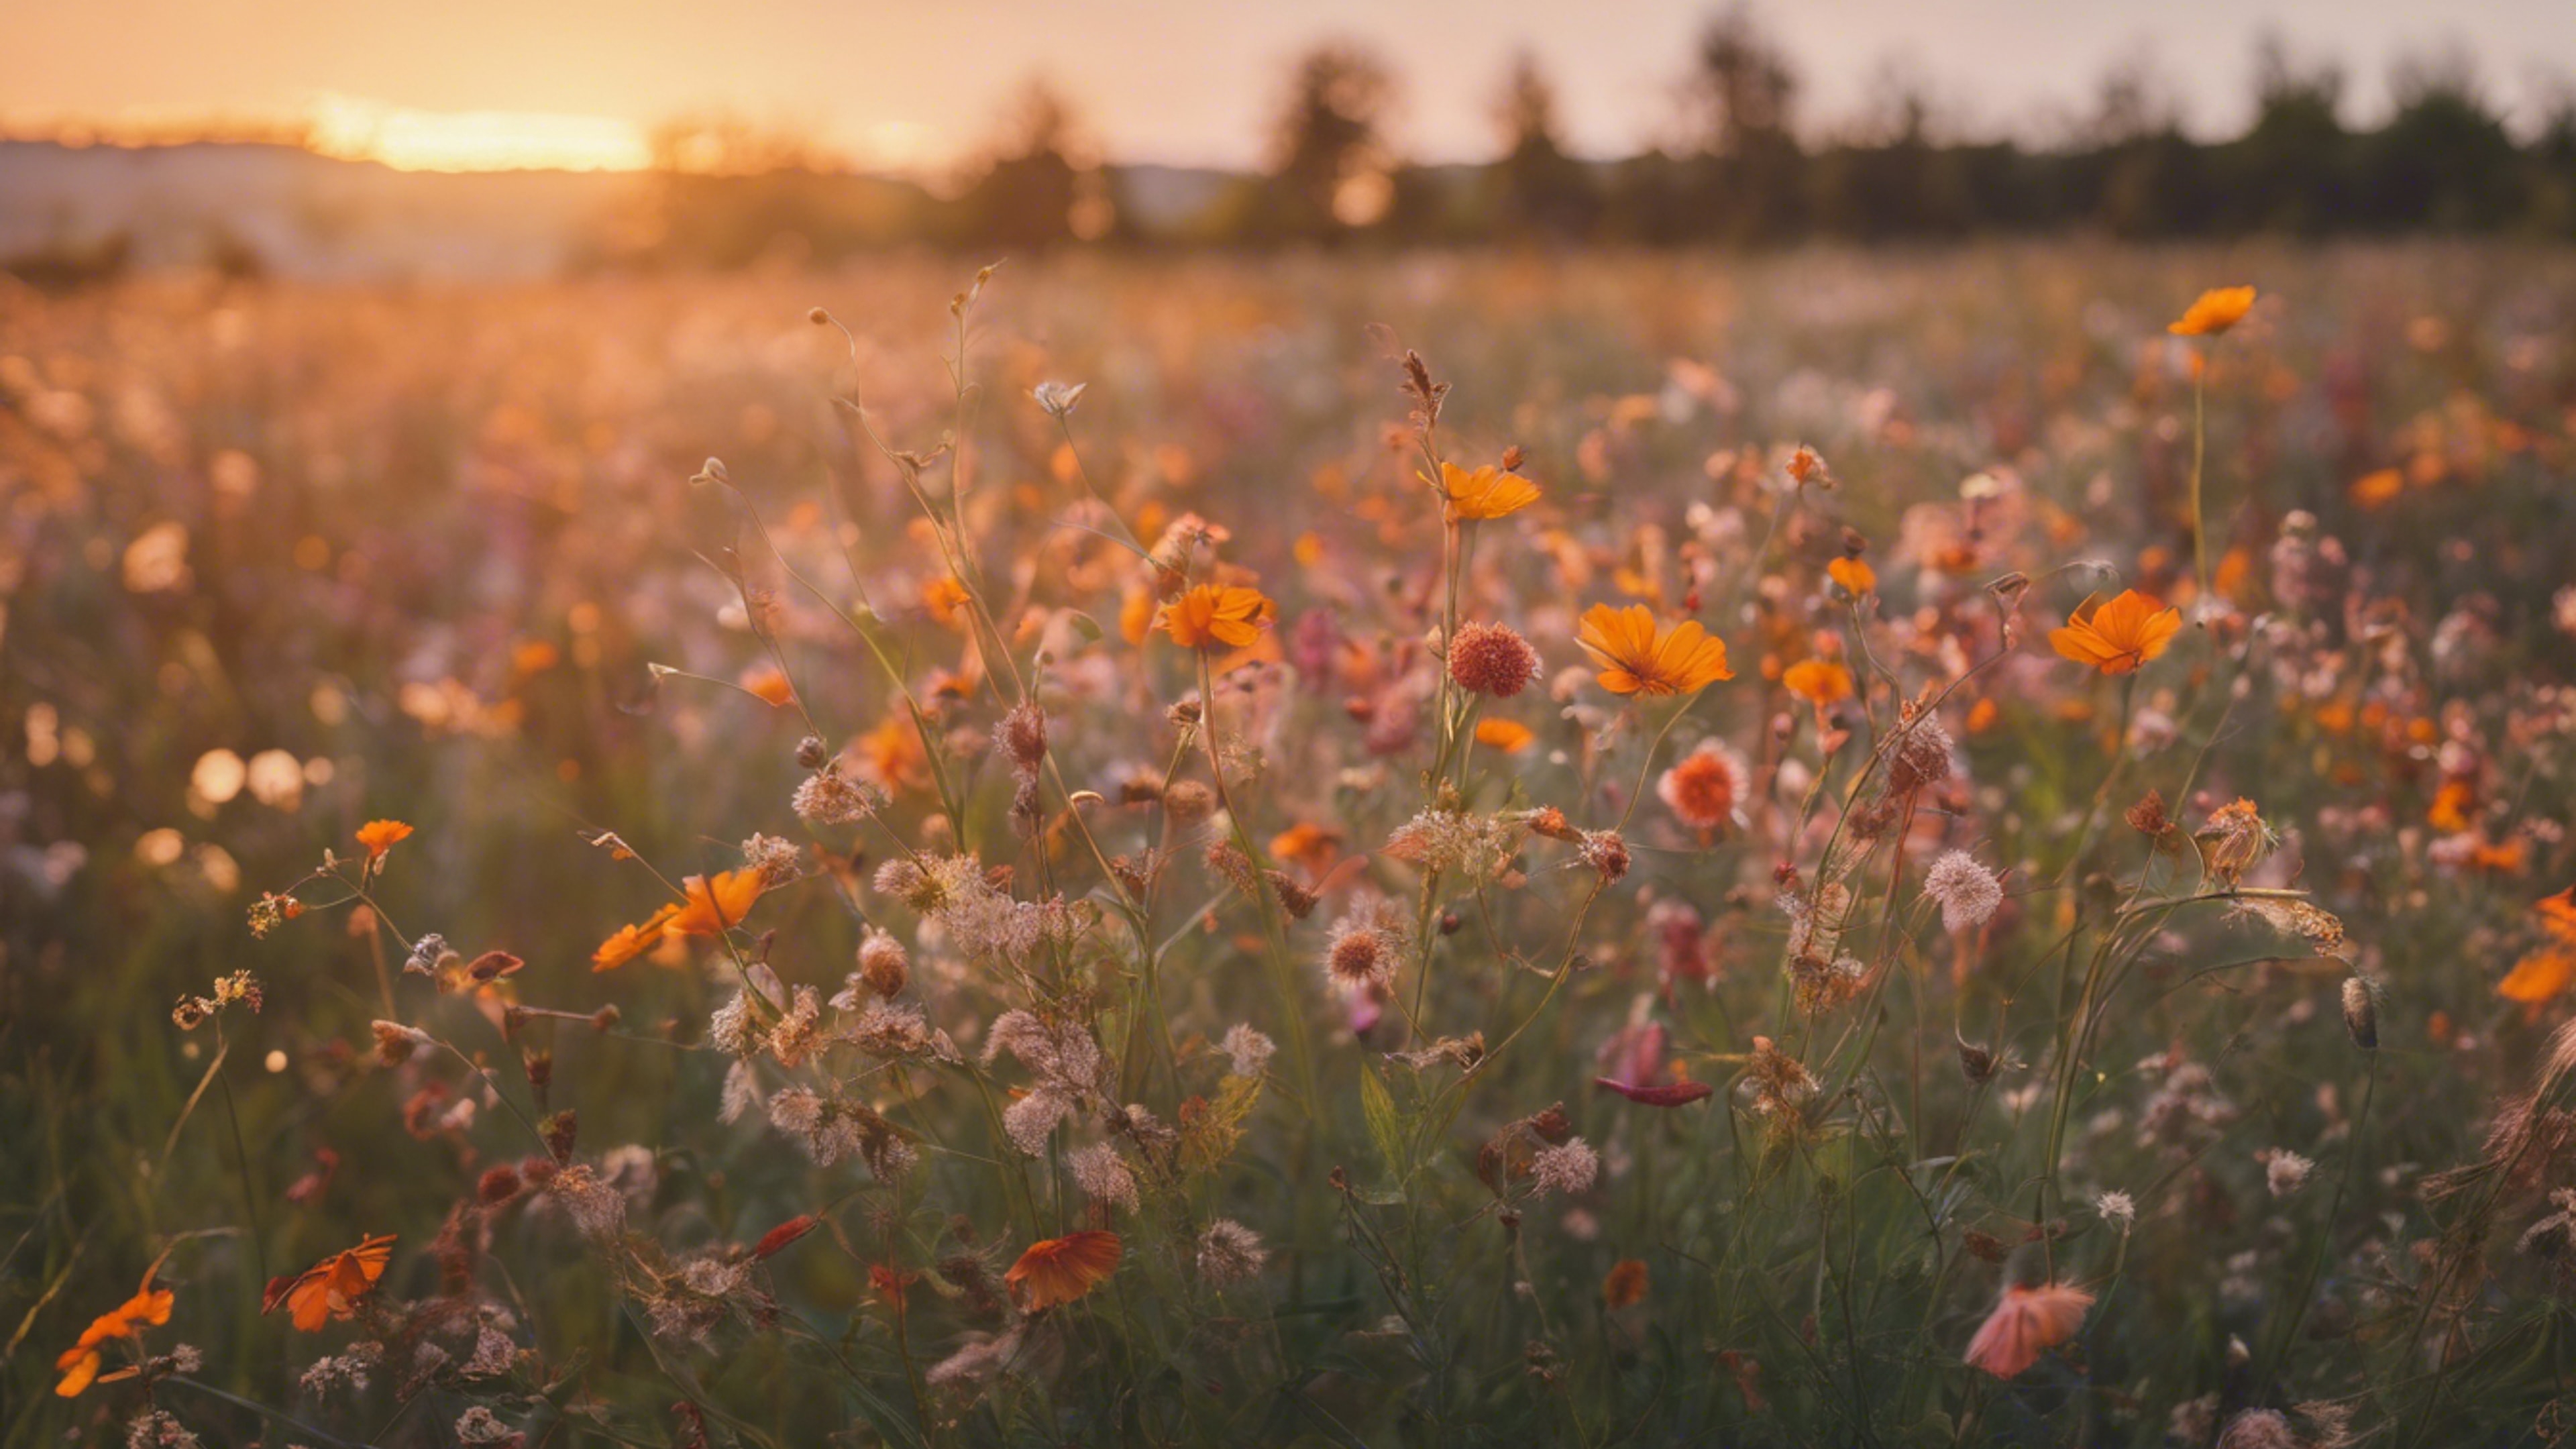 A nostalgic field of wildflowers in sunset hues. کاغذ دیواری[1a5d684a5d8746a6914f]